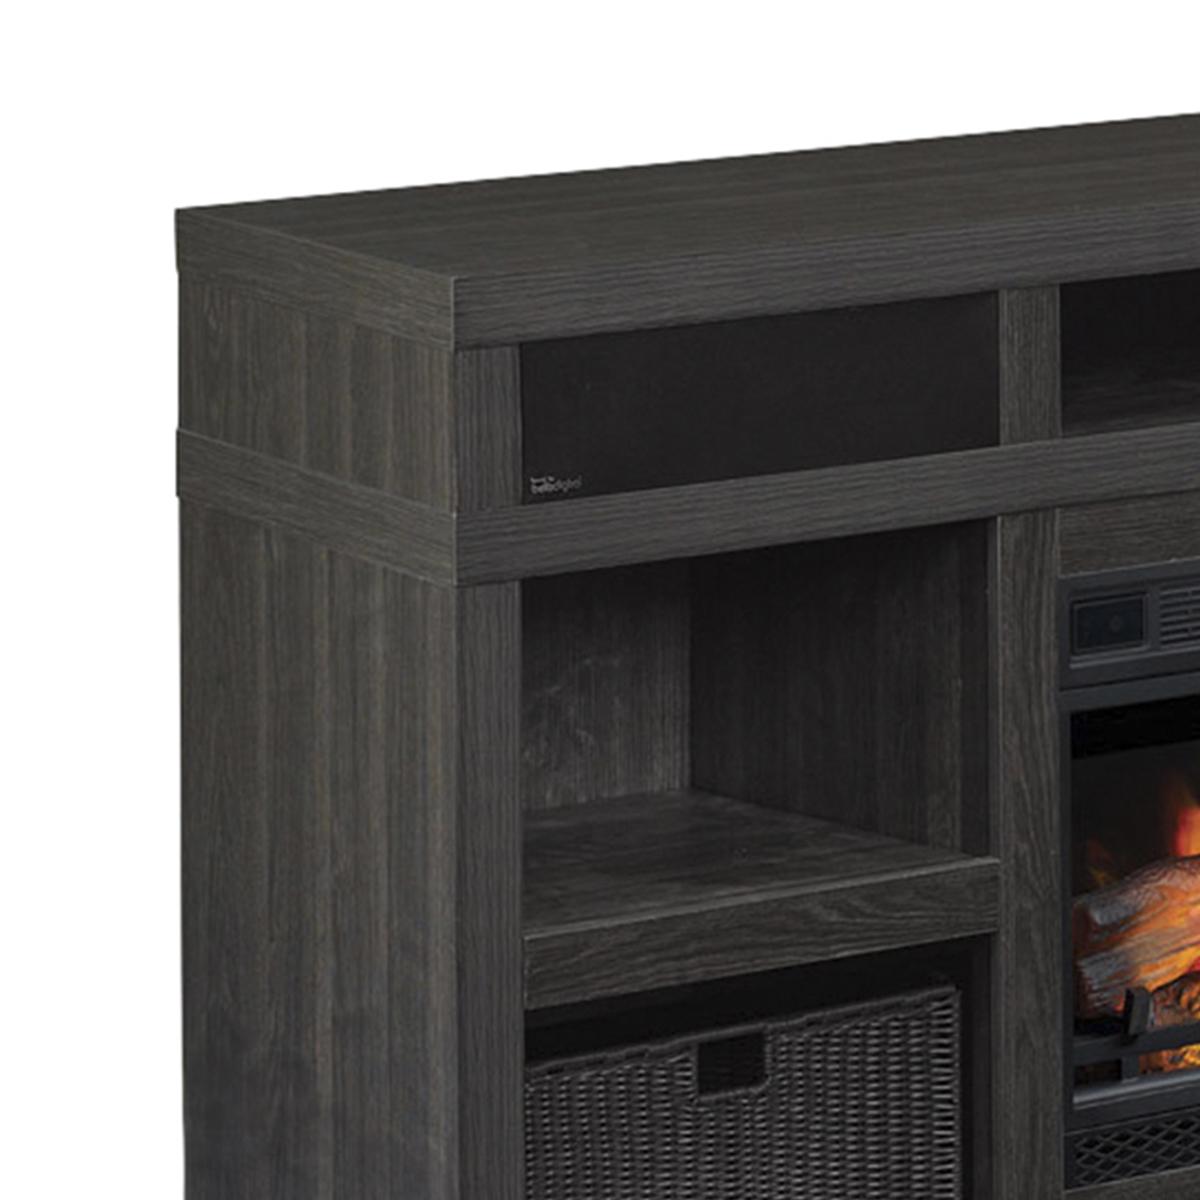 Value City Tv Stand with Fireplace Elegant Fabio Flames Greatlin 64" Tv Stand In Black Walnut